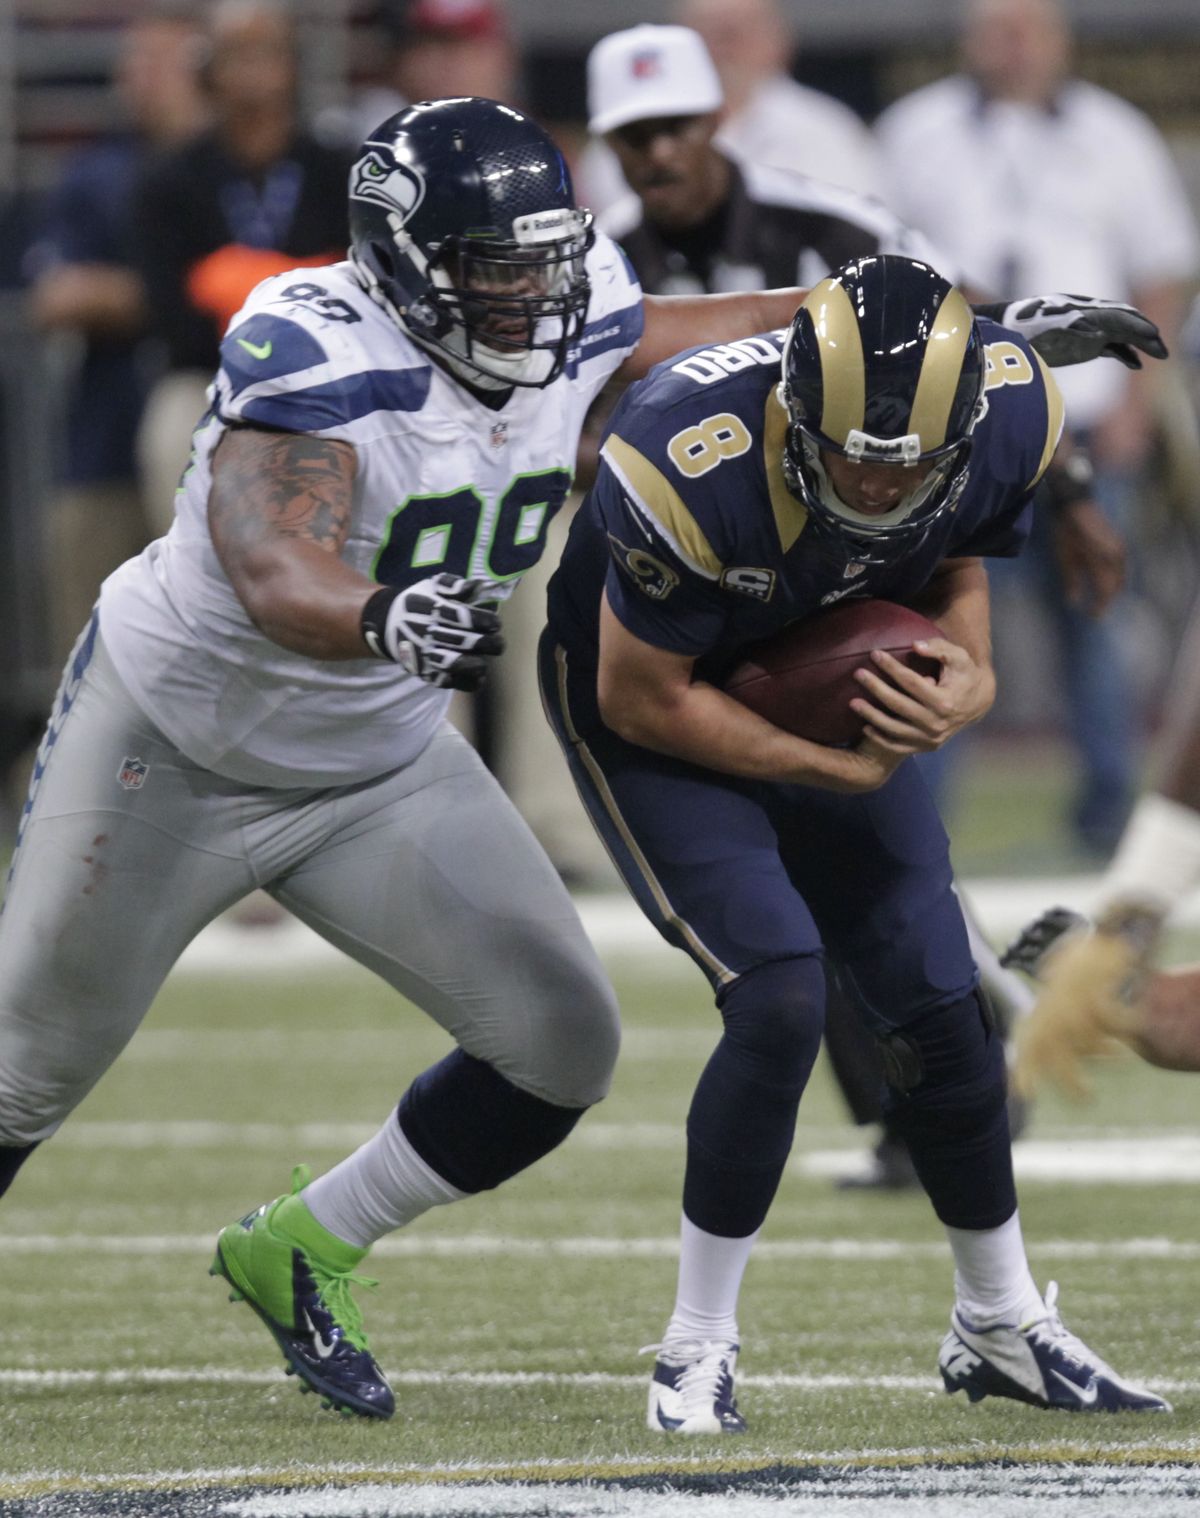 It appears Seahawks tackle Alan Branch, left, will be able to play despite ankle injury. (Associated Press)